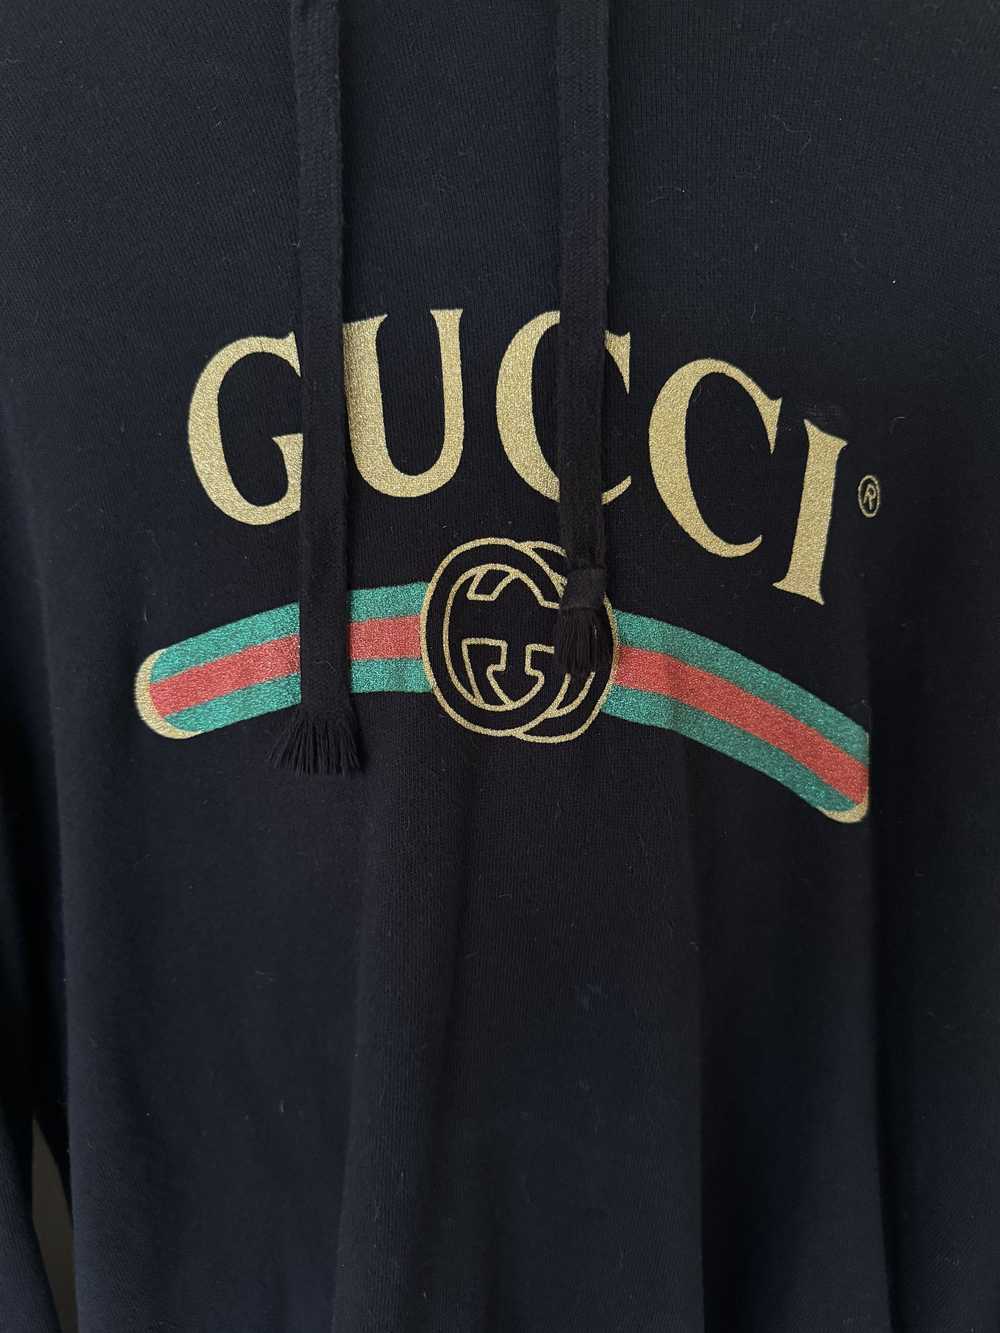 Gucci Glitter Gucci Embrodiered Wolf Hoodie - image 2